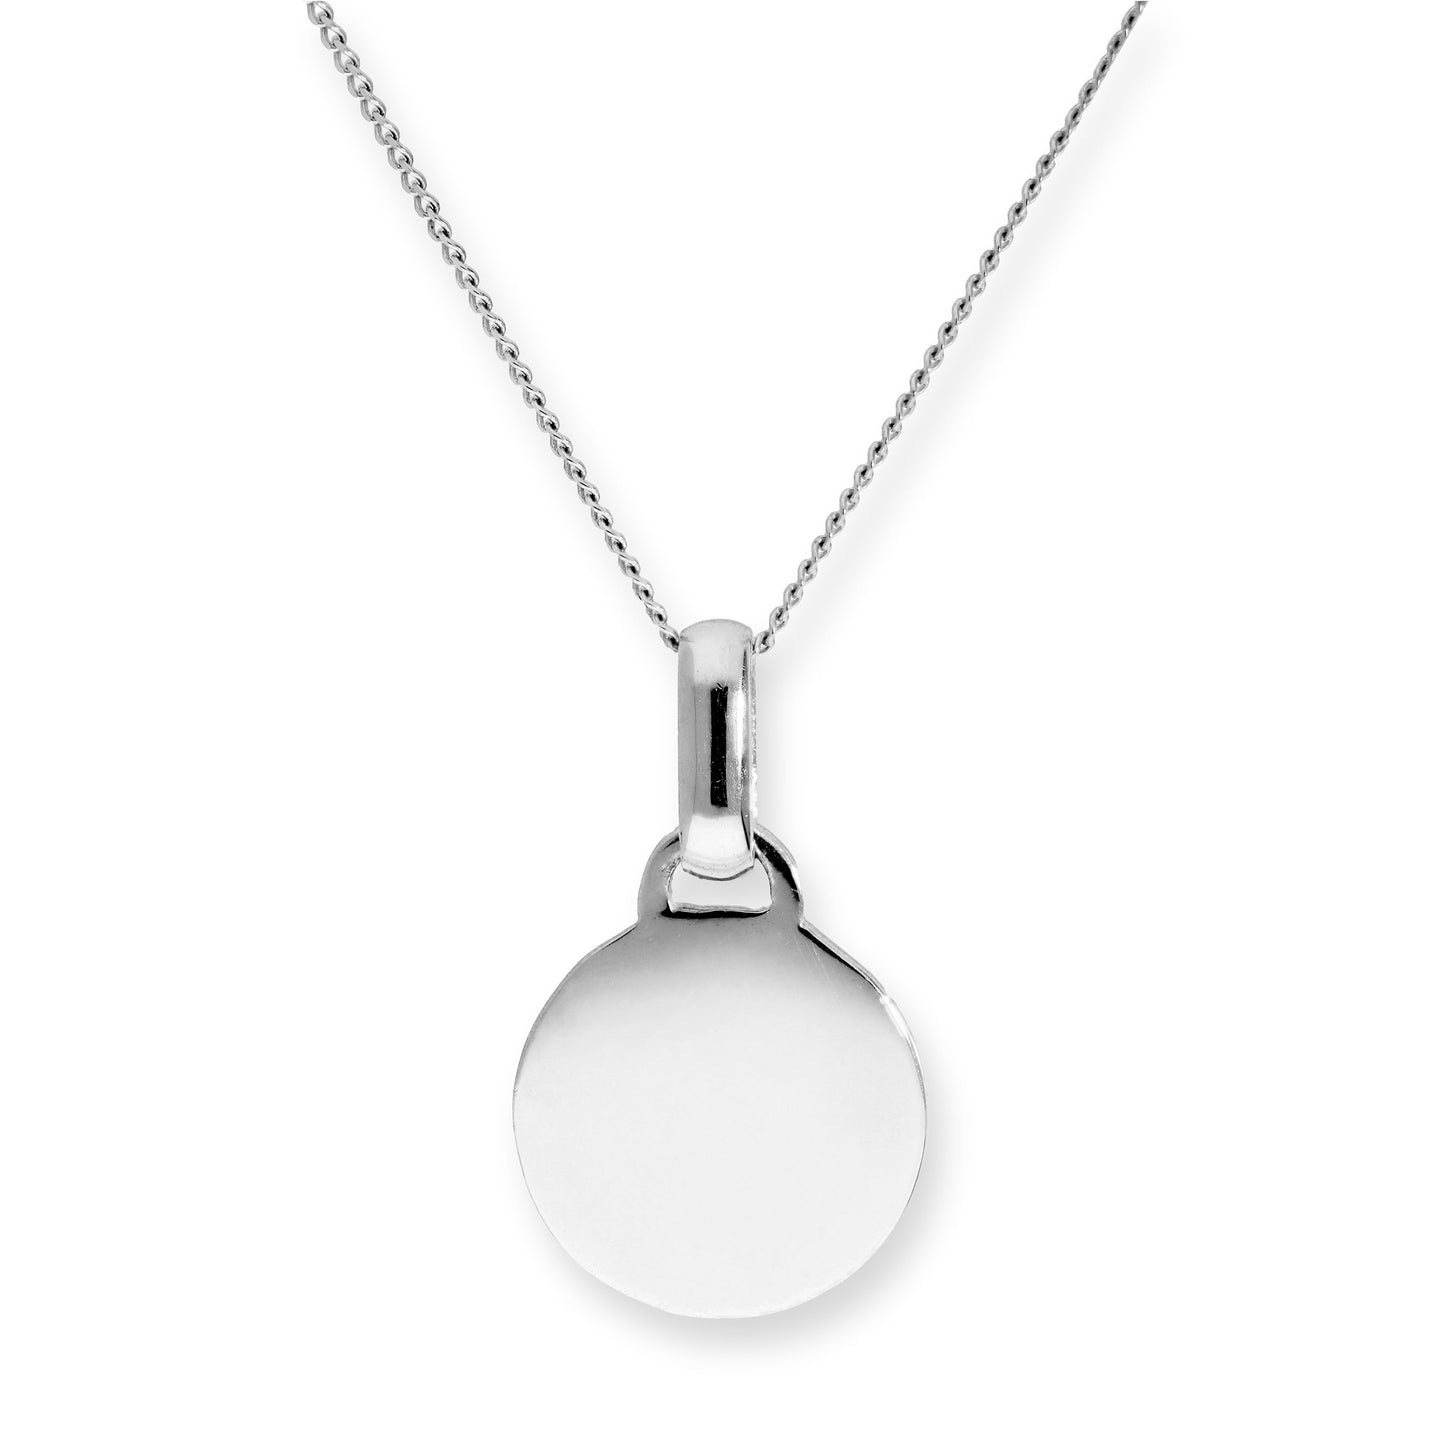 9ct White Gold Engravable Round Pendant Necklace 16-20 Inches